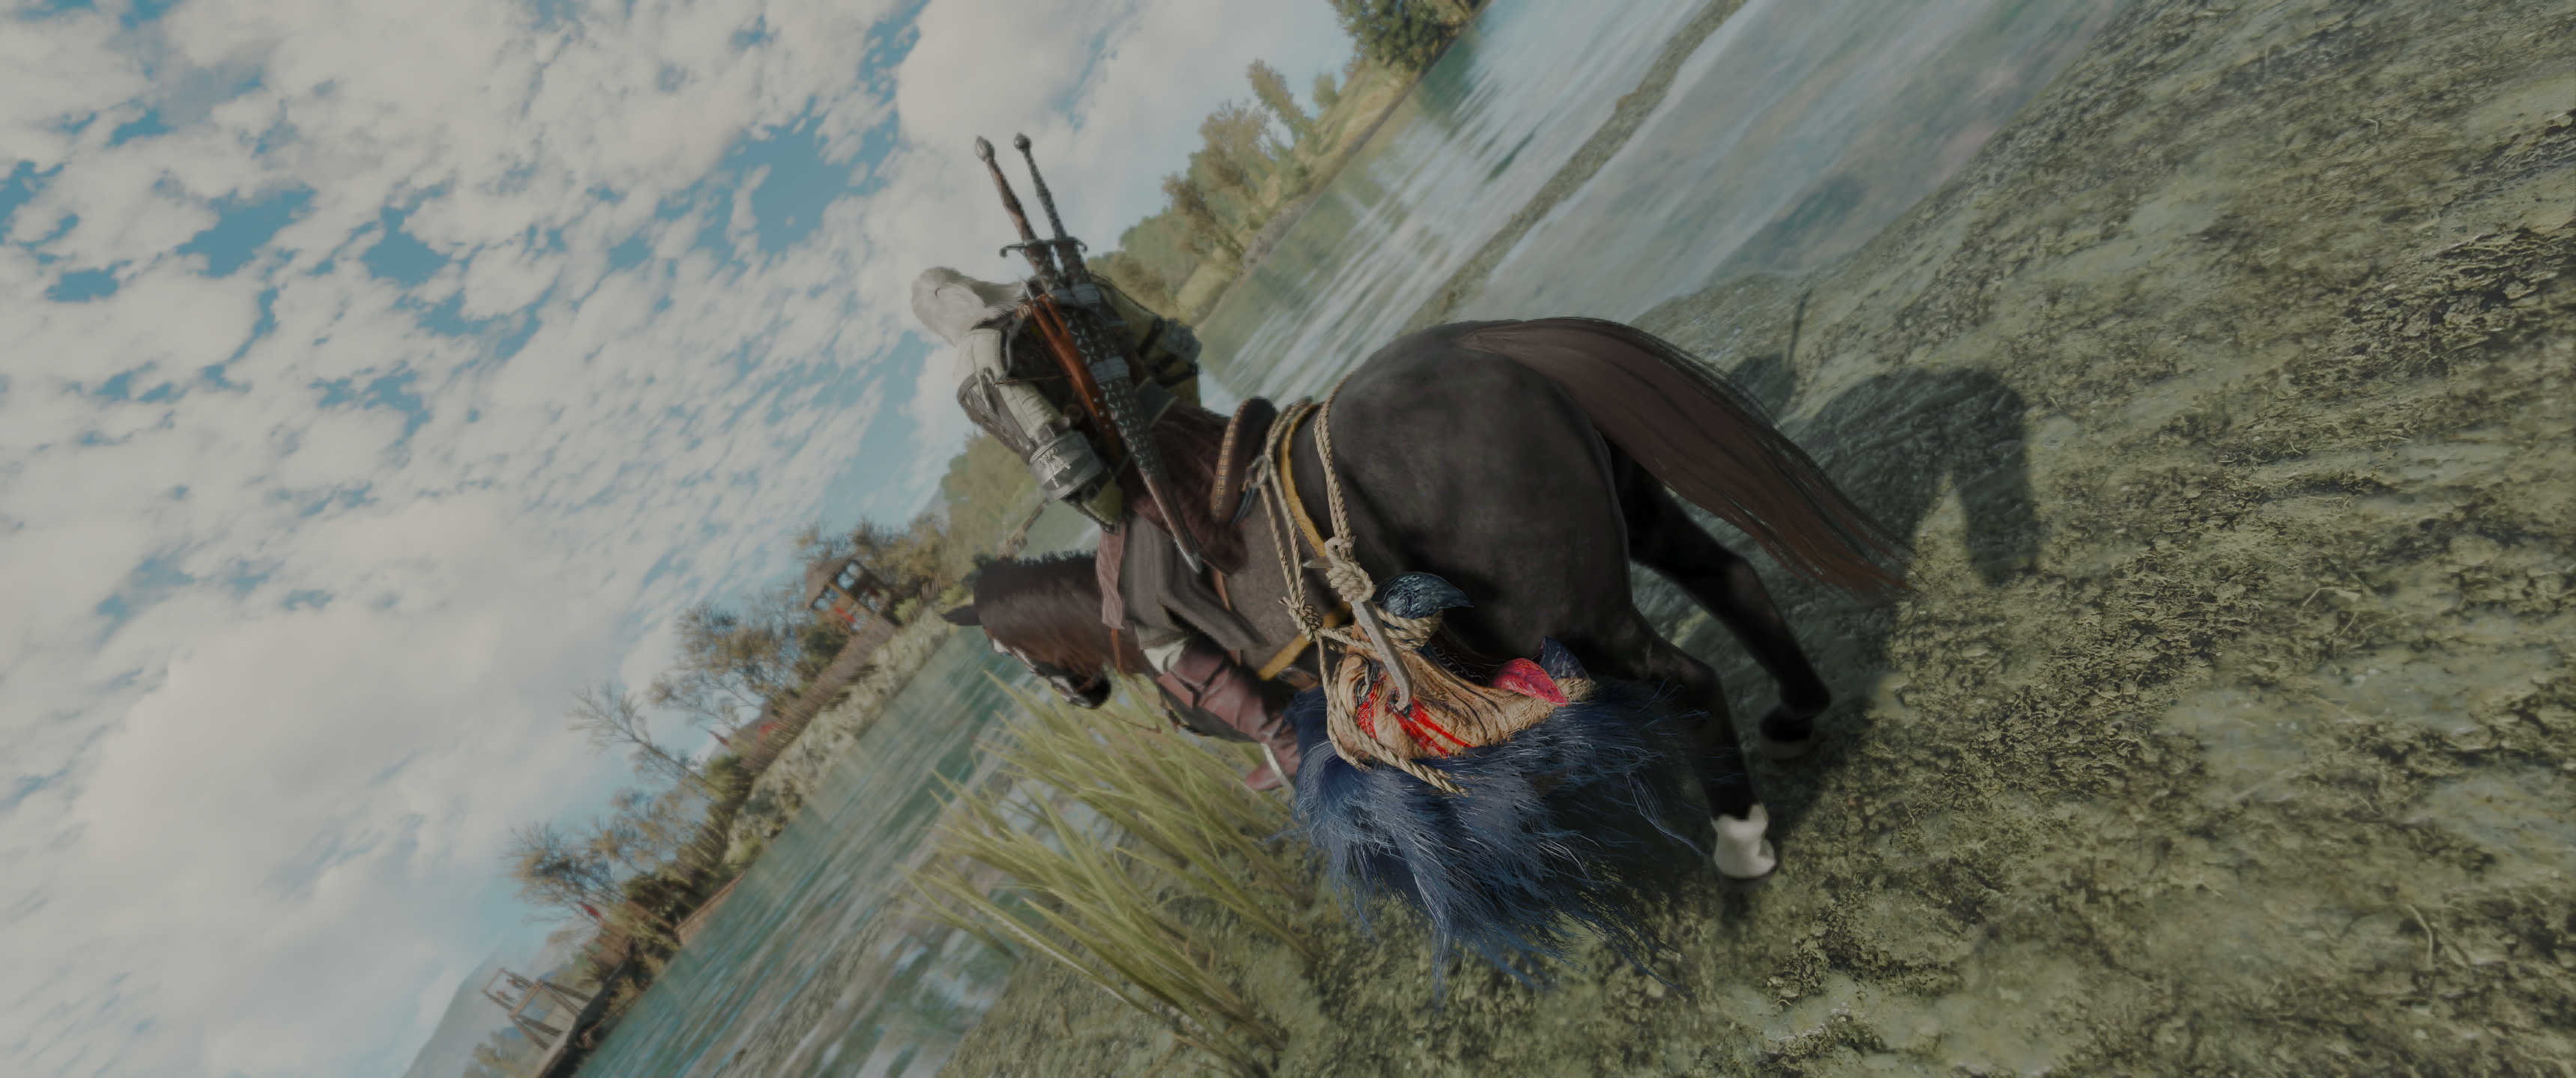 General 3440x1440 The Witcher 3: Wild Hunt Geralt of Rivia griffins video games CGI sky clouds water horse sword armor animals